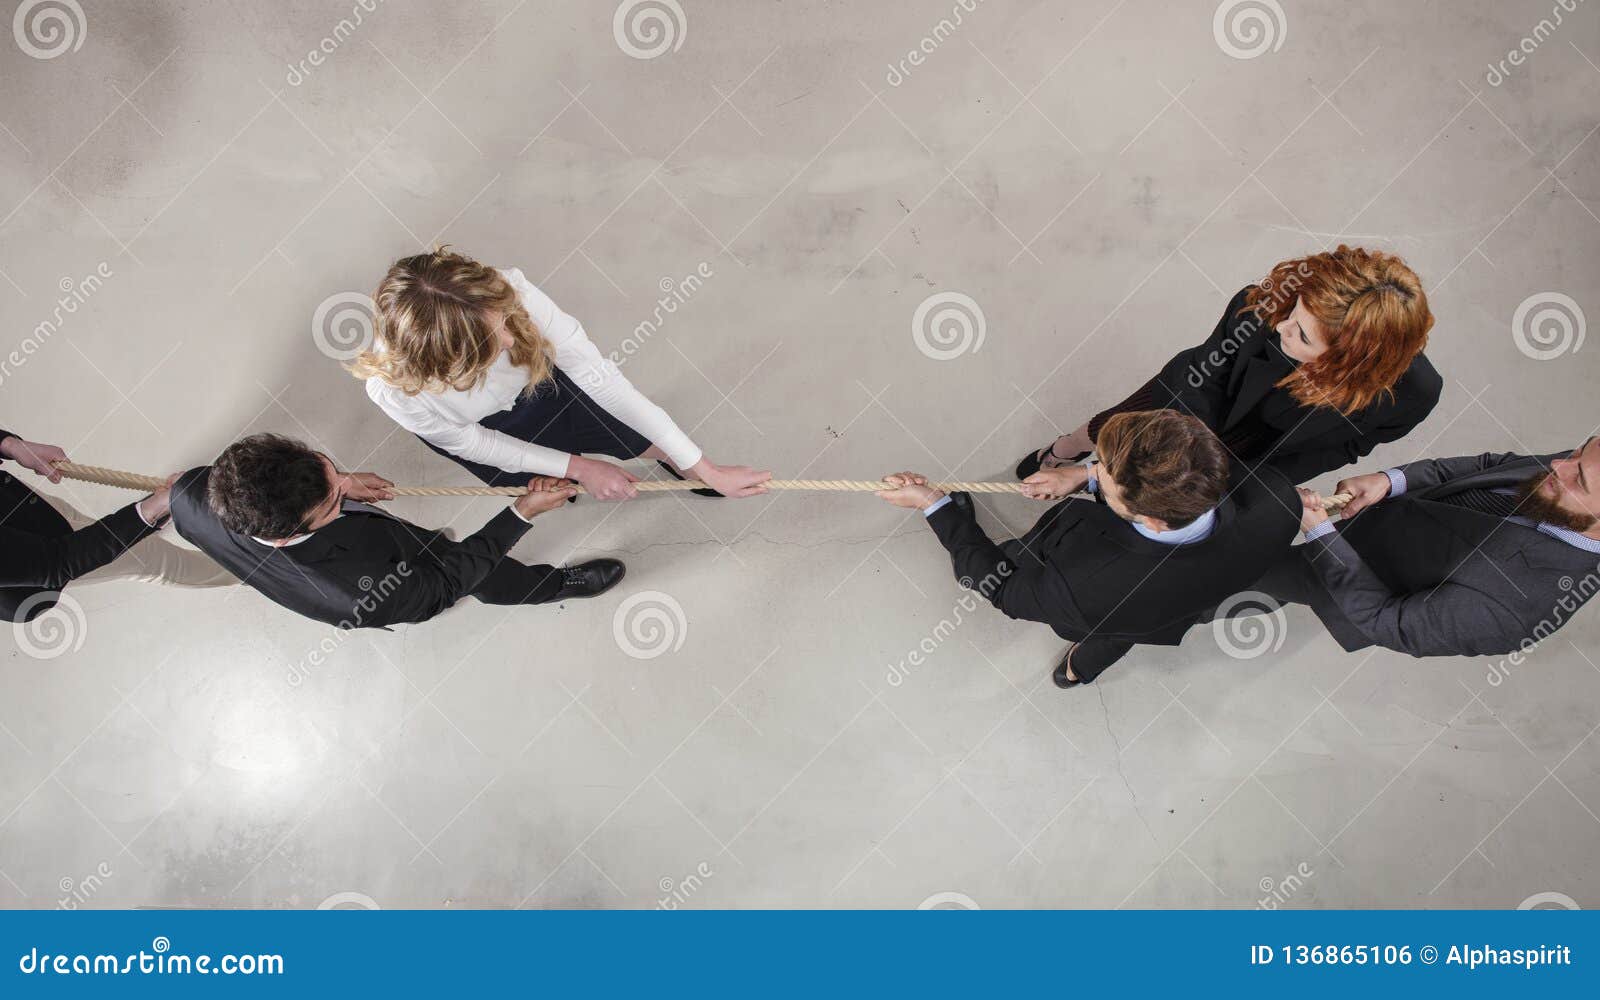 rival business man and woman compete for the command by pulling the rope